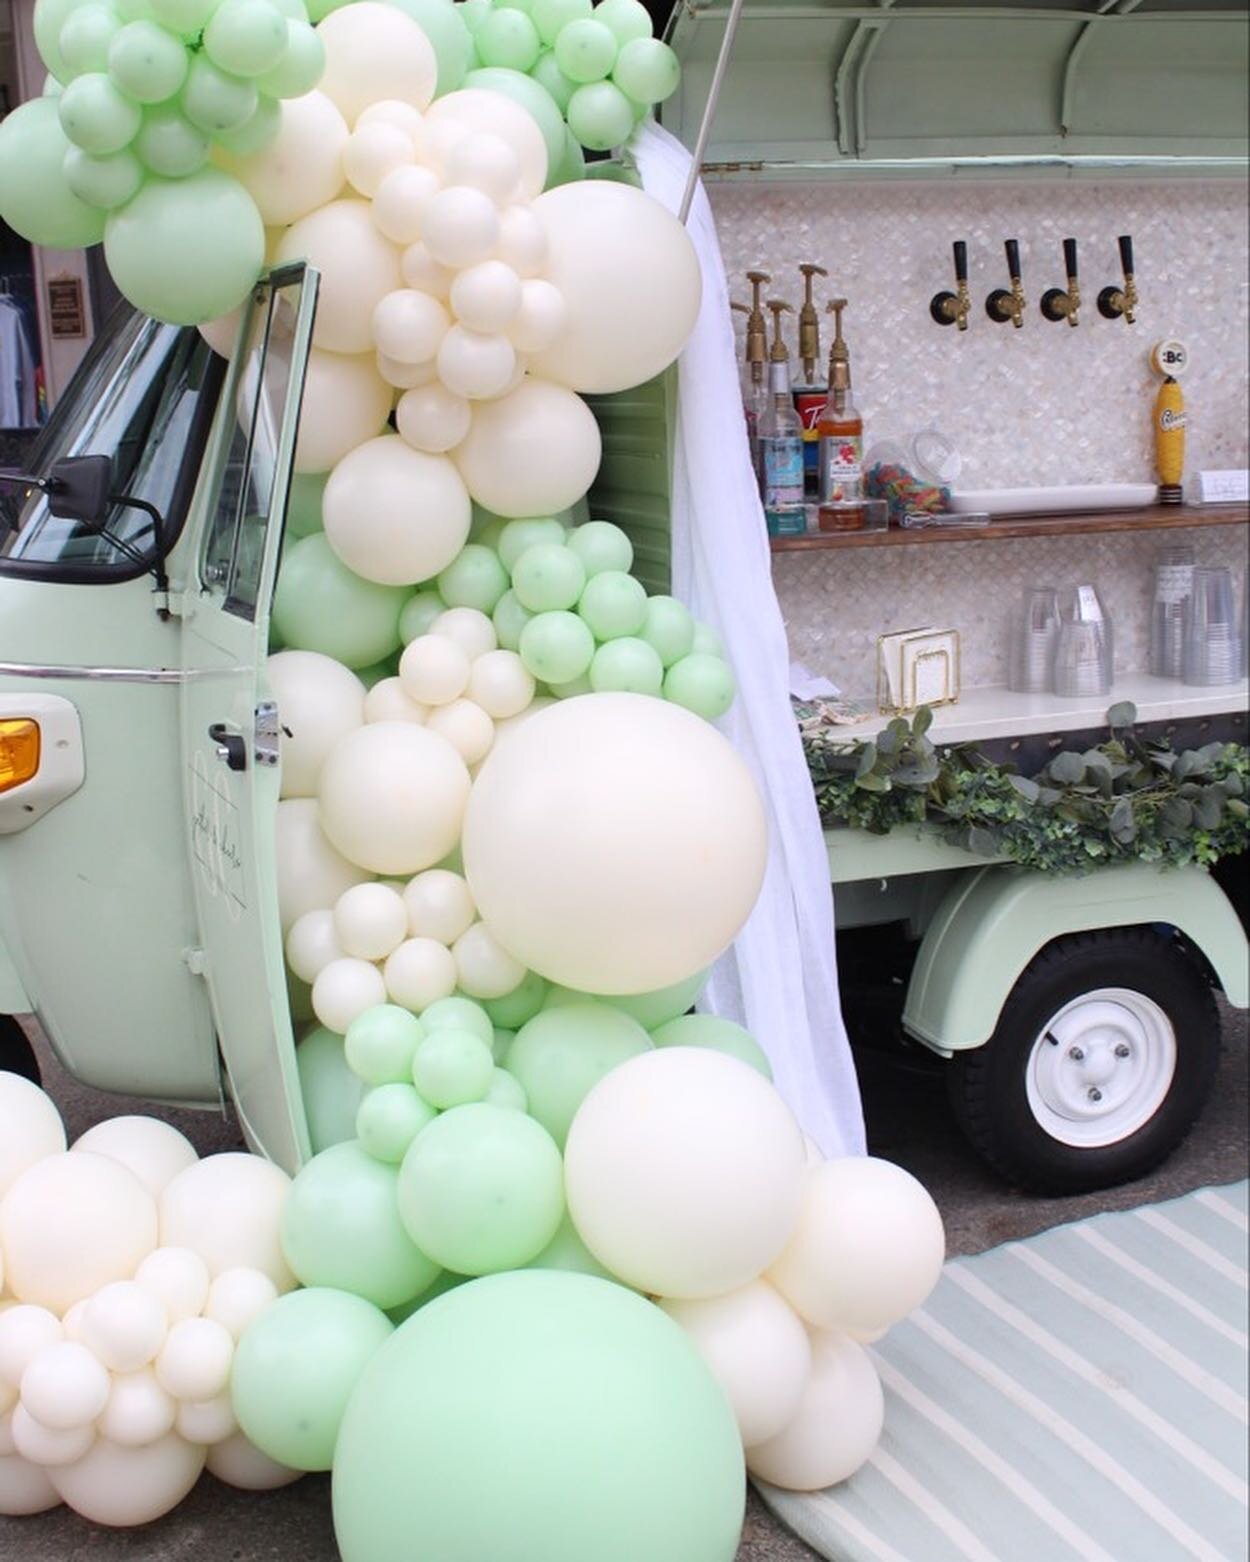 Balloons to go with such a cute tap truck. Can&rsquo;t get over how cute it is!! 
&bull;
&bull;
Tap Truck: @gatherandcheerstaptruck 
Balloons: @letsballooncharlotte 
&bull;
&bull;
#balloons #charlotteballoons #charlotte #clt #taptruck 
Colors 
Tuftex